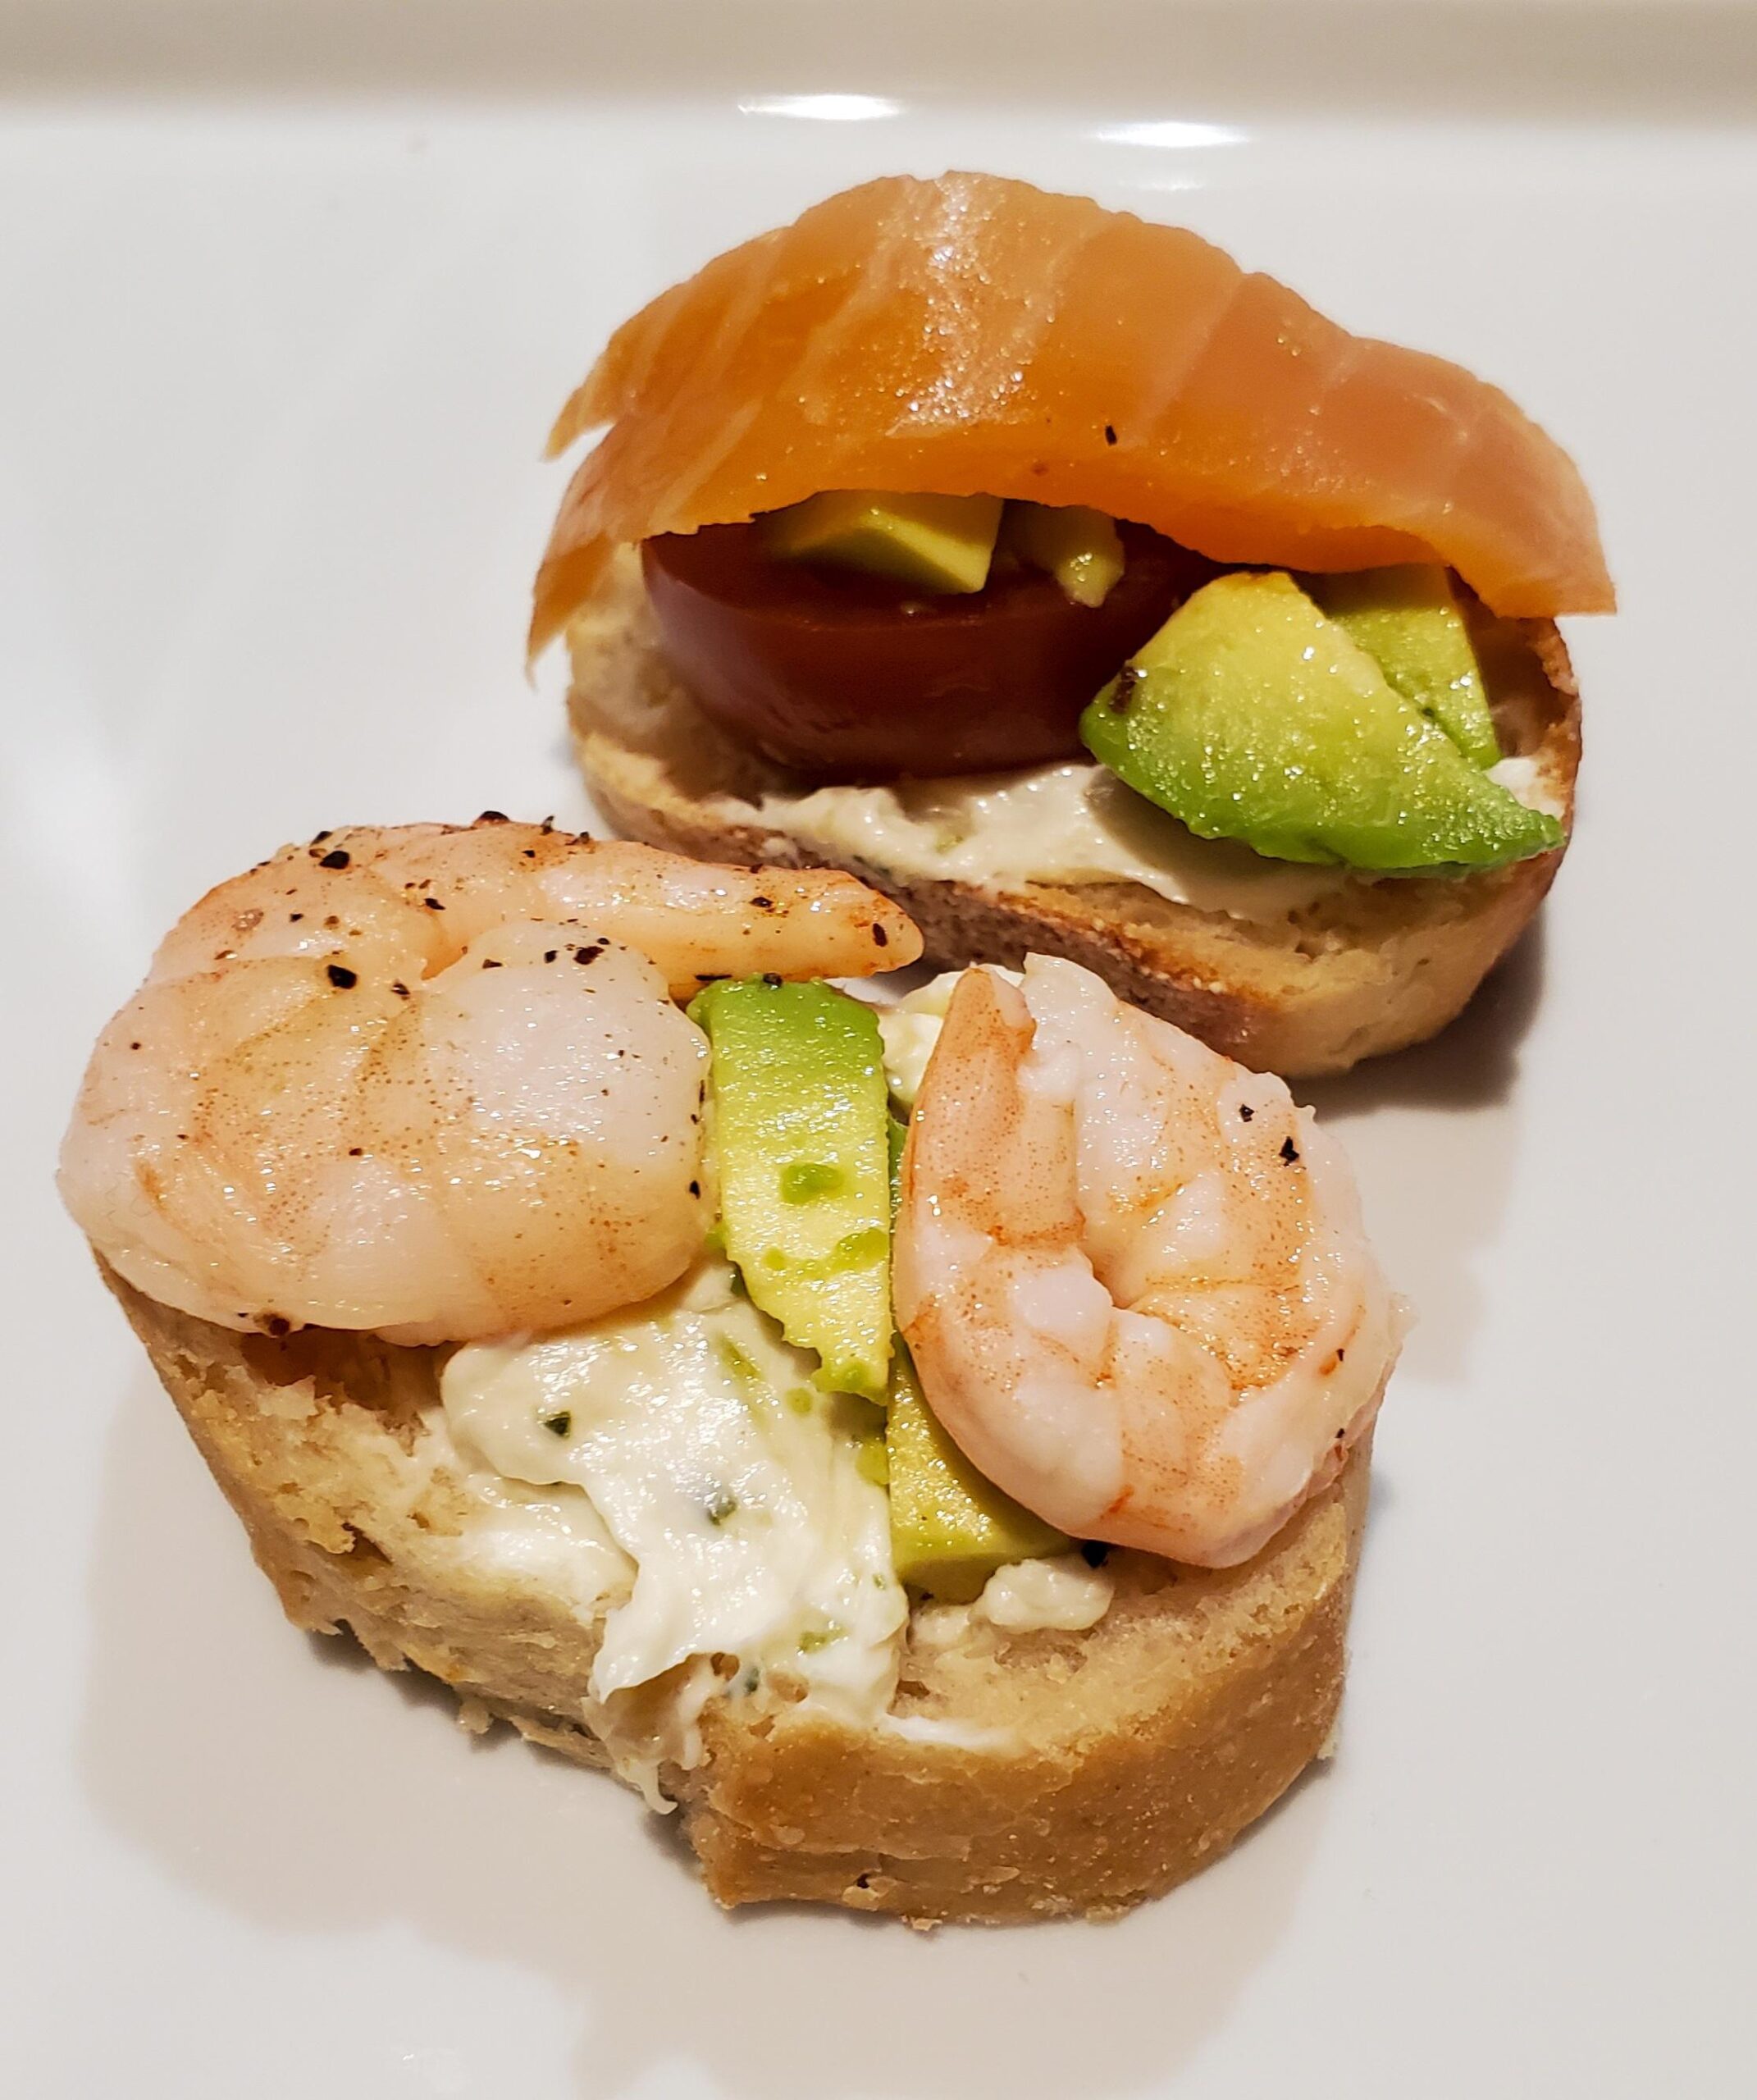 Shrimp and smoked salmon baguettes from Cleveland Cooking